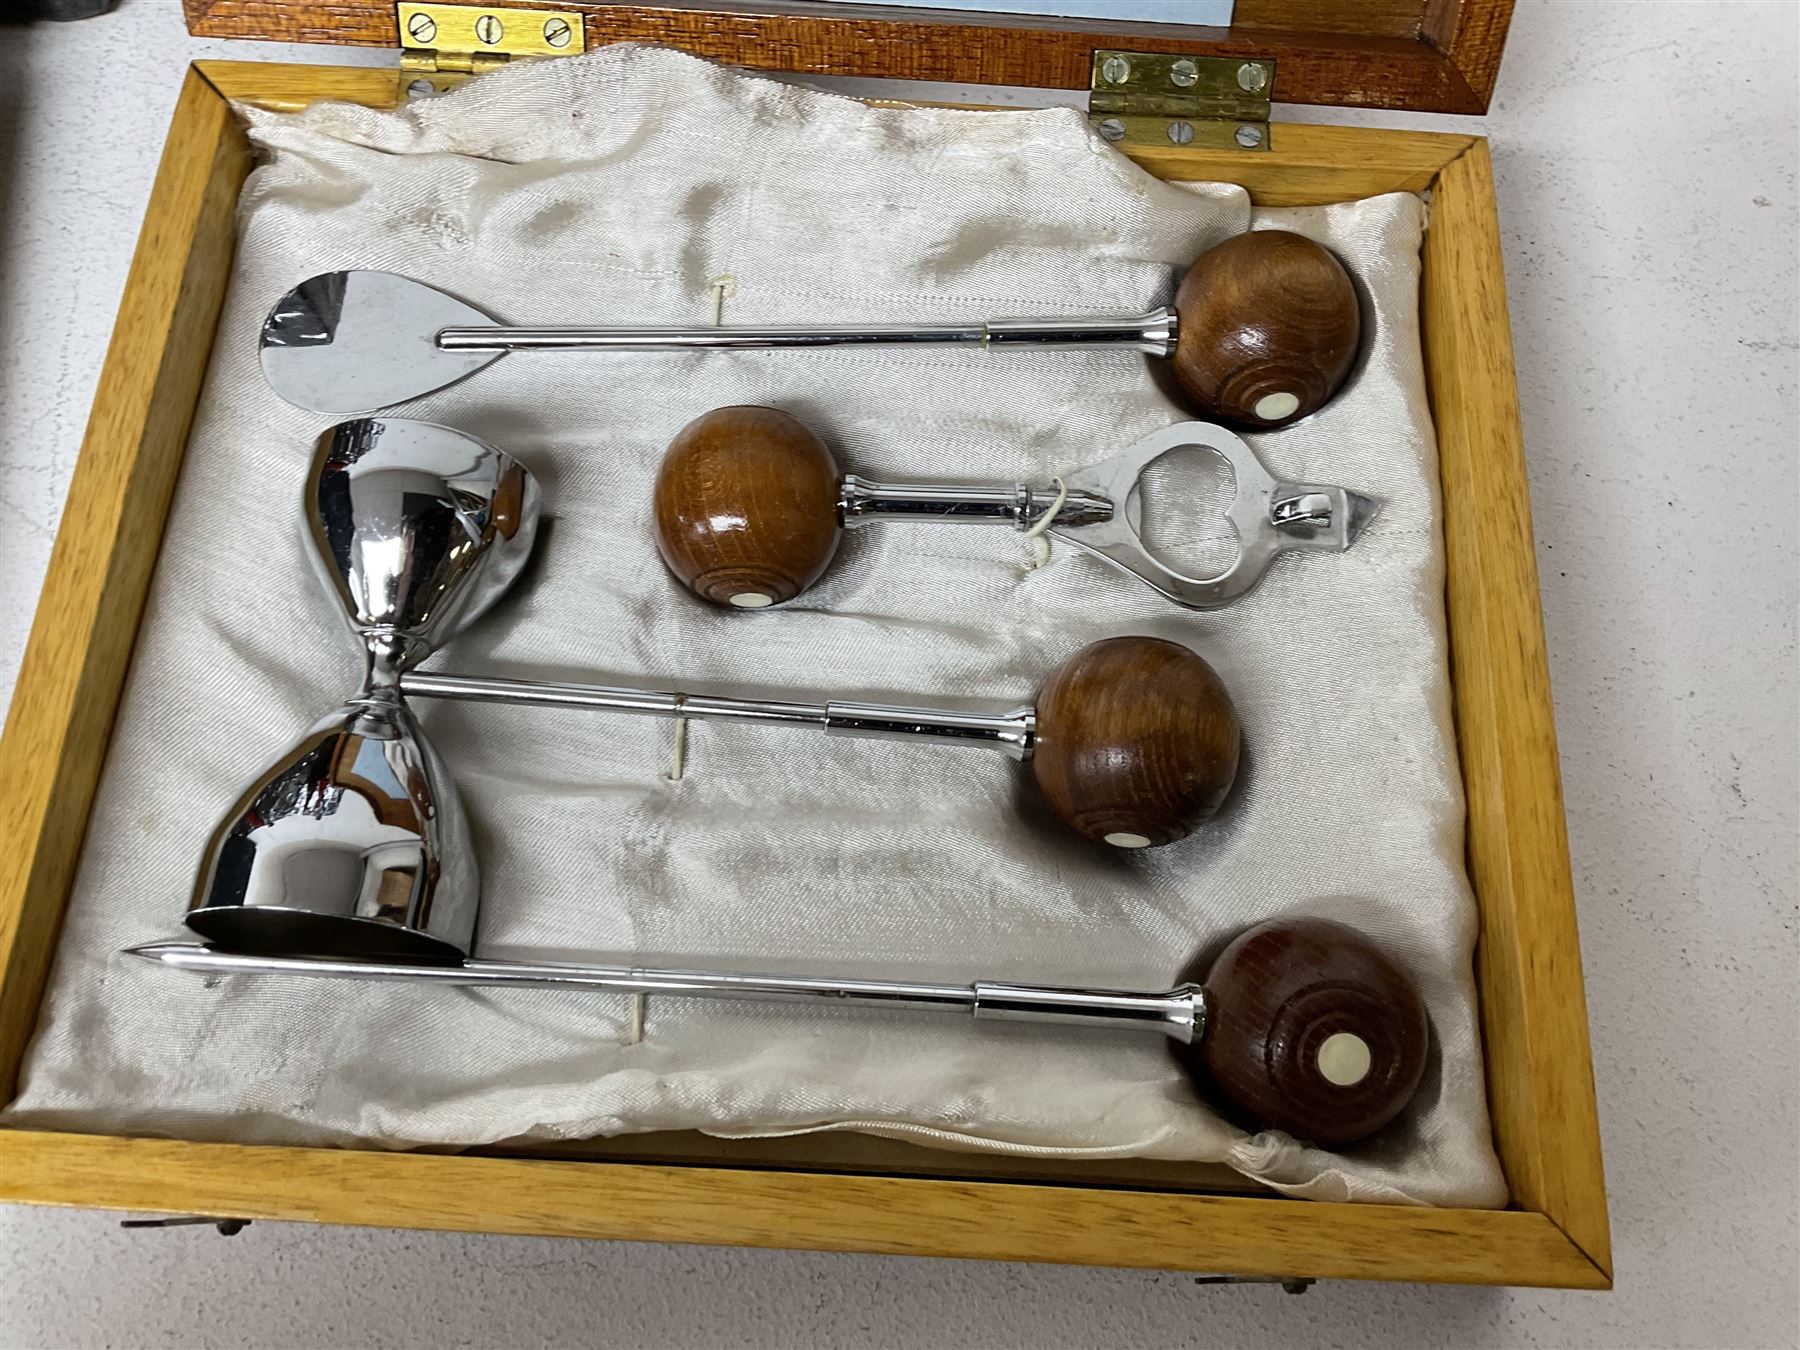 1940's bar tools in a wooden case - Image 3 of 4